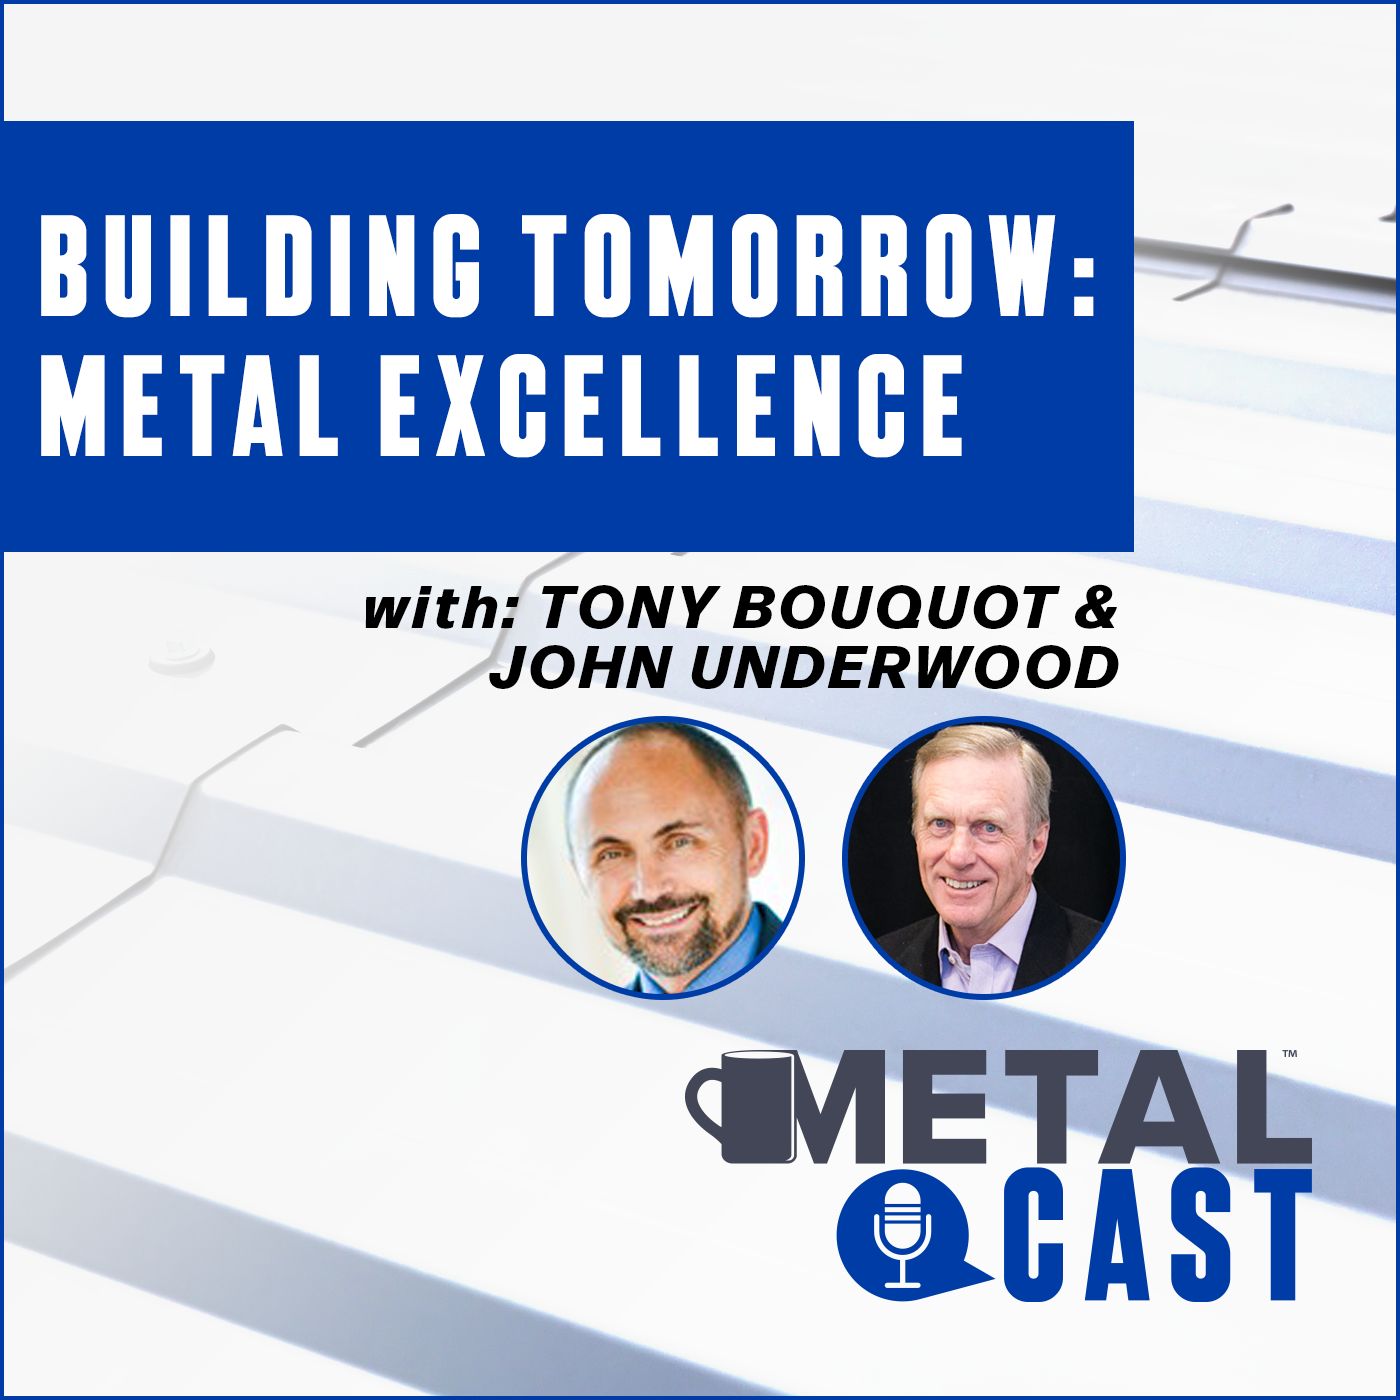 Building Tomorrow: Metal Excellence